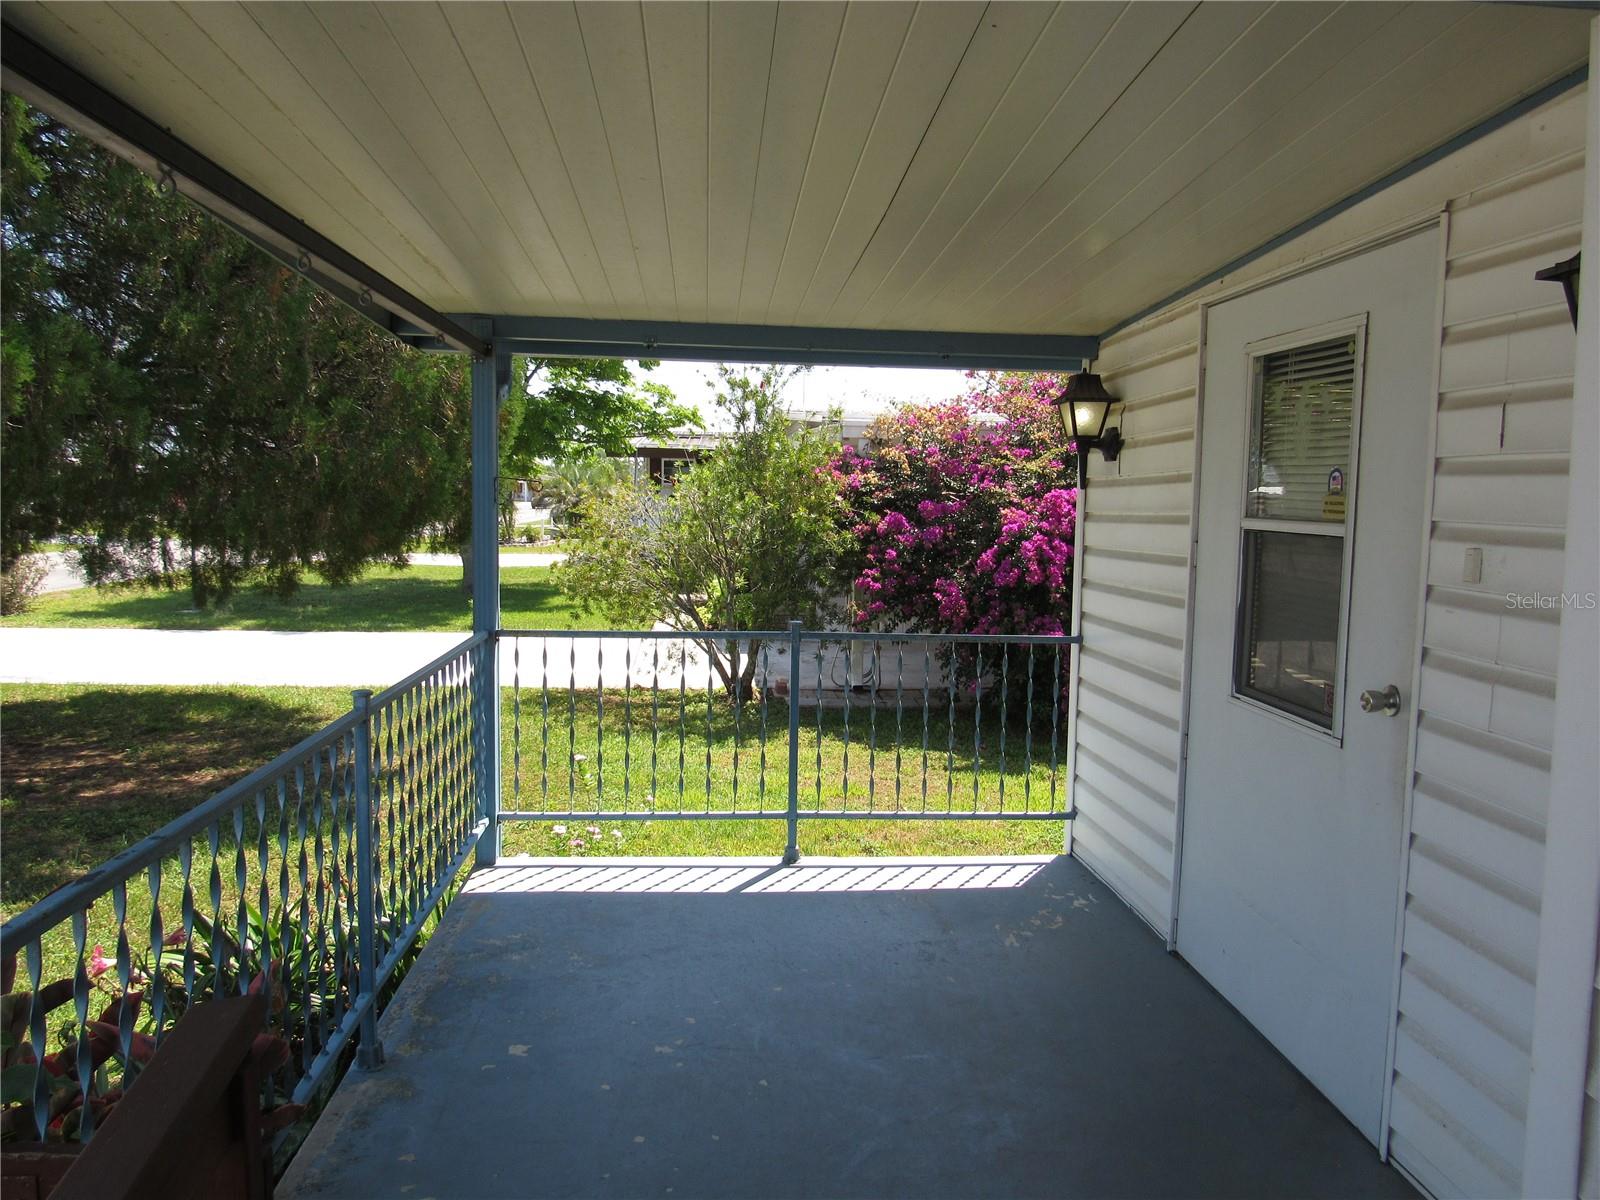 Covered front porch & entry.